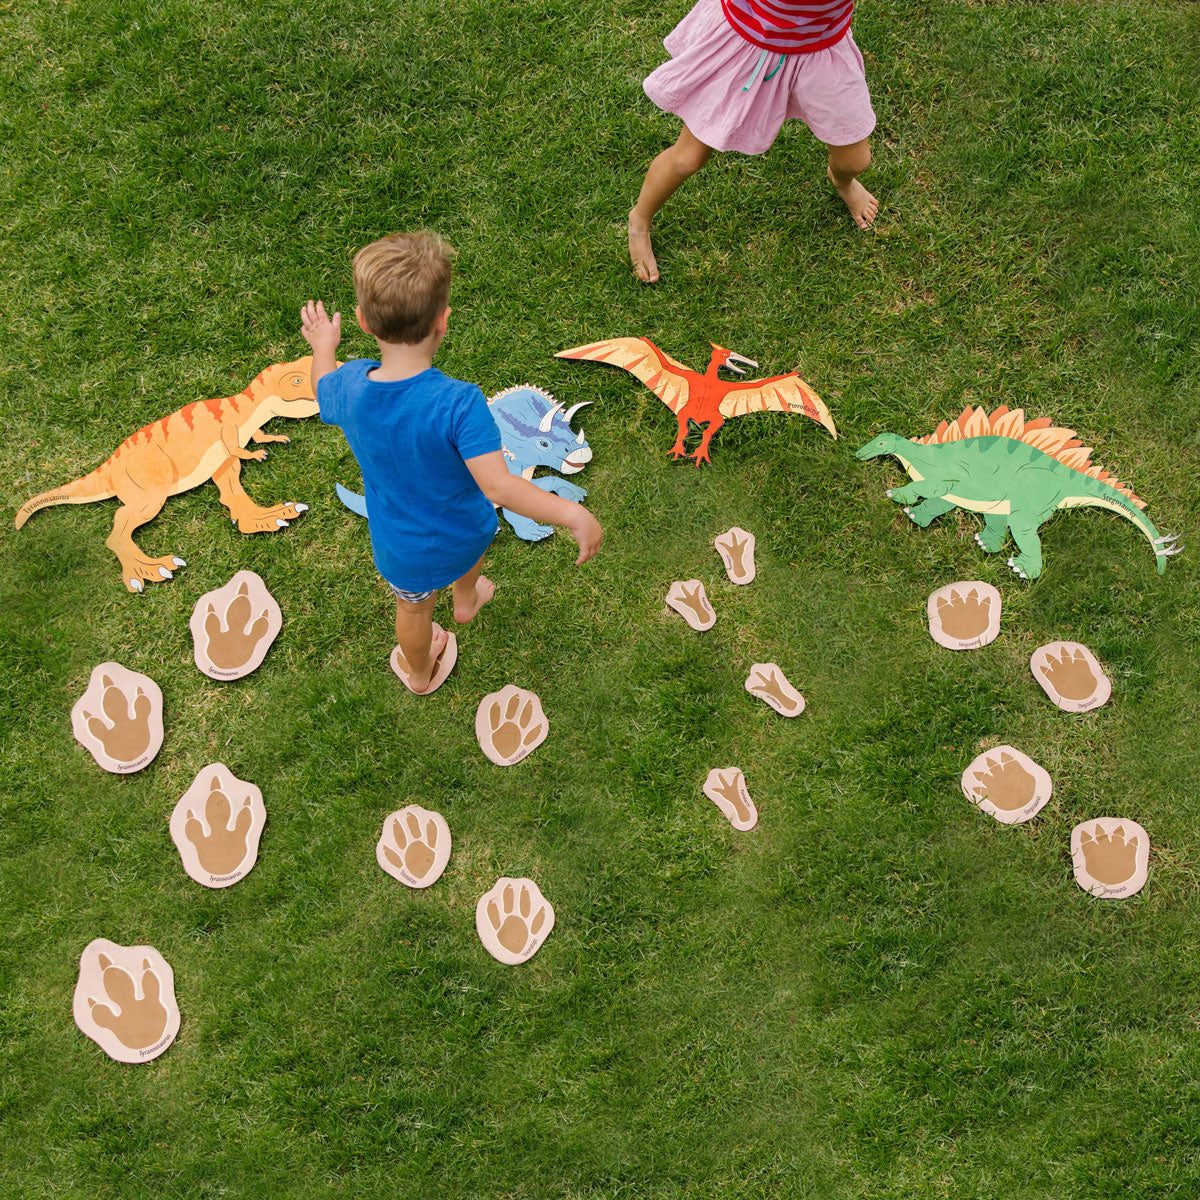 Chasing Dinosaurs, Introduce your little ones to the fascinating world of dinosaurs with our Dinosaur Footprint Trailset! This exciting playmat set features 20 non-slip, thick, natural rubber backed mats that come in various sizes, from 78cm for the largest piece to 13cm for the smallest piece. Each mat displays a colourful footprint of a different dinosaur including the Pterodactyl, Stegosaurus, Triceratops and Tyrannosaurus Rex, which makes learning fun and engaging.The Chasing Dinosaurs mats are also con